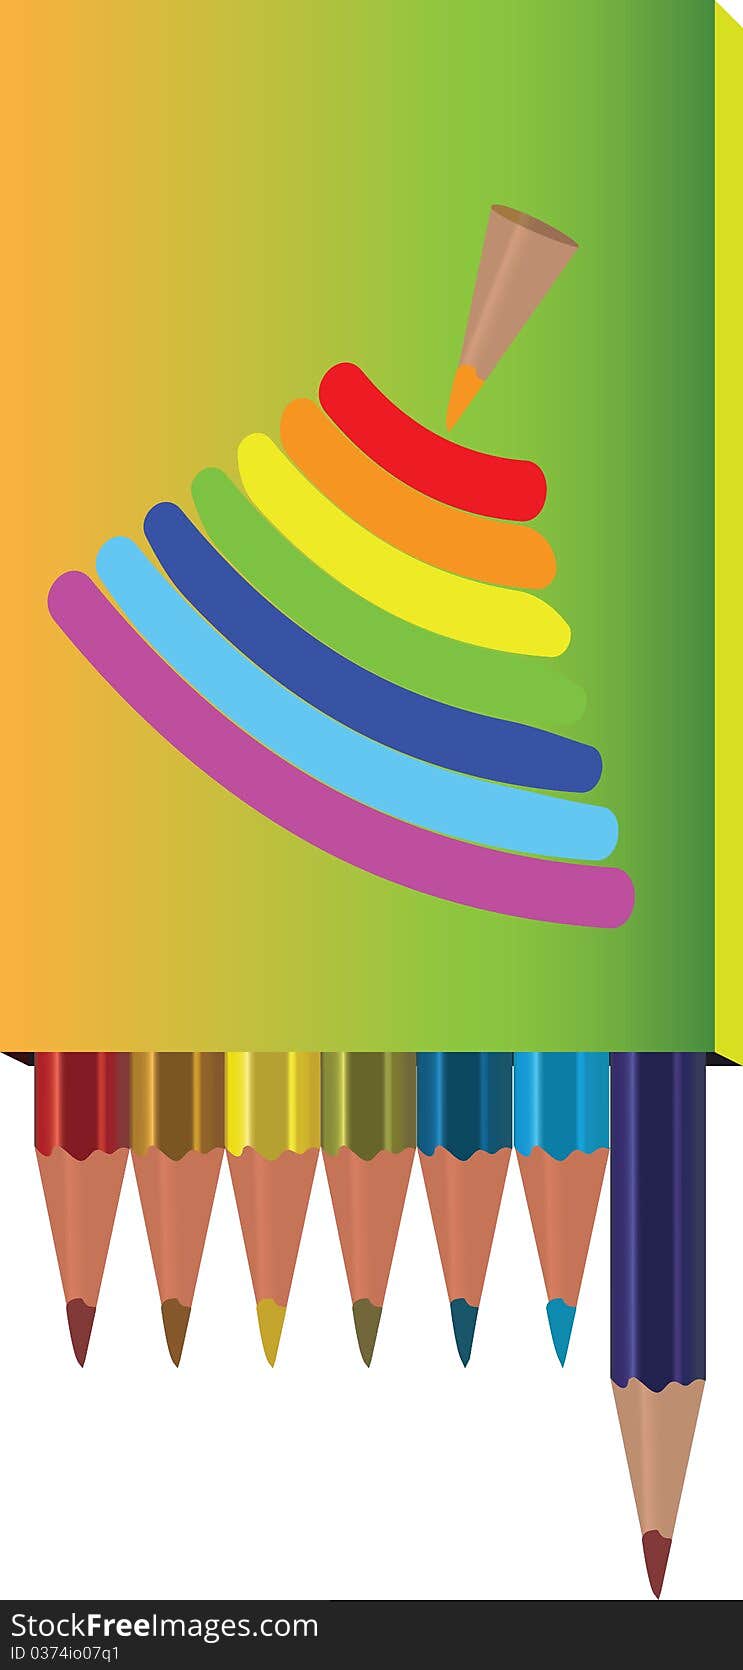 A colorful collage of colored pencil points.